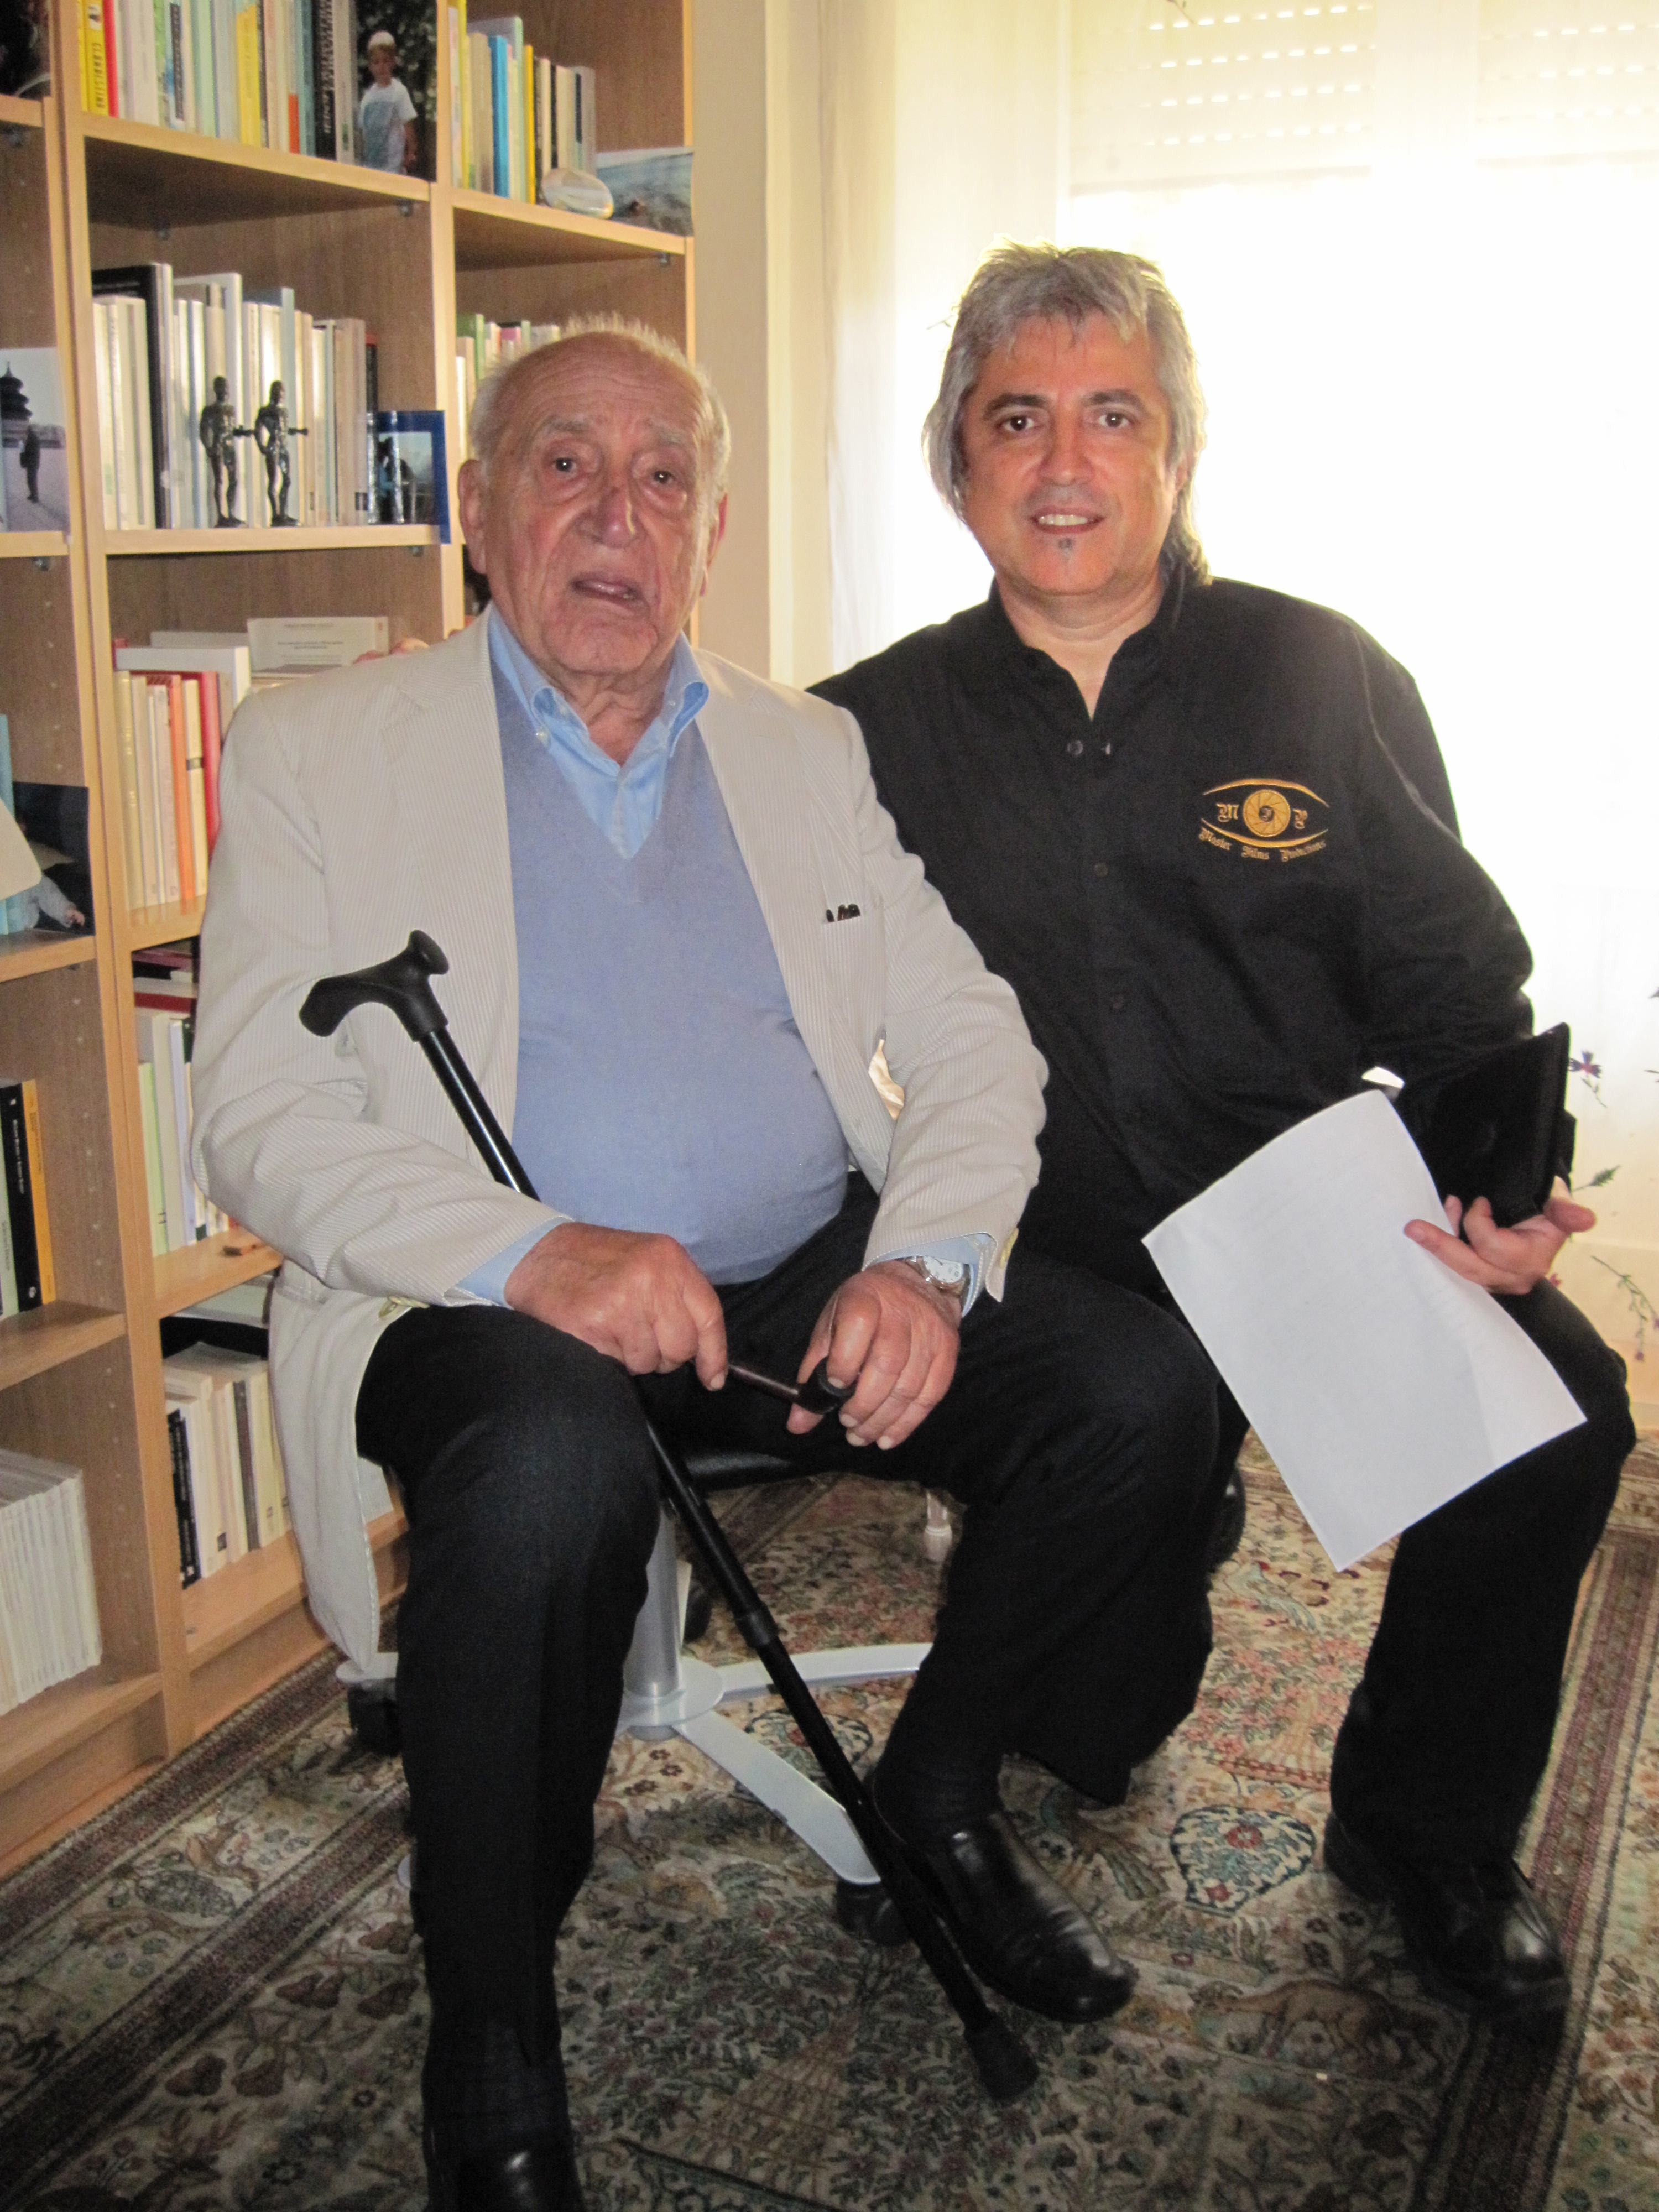 Arnoldo Foa and Boris Acosta during filming of Dante's Hell Documented in Rome, Italy.